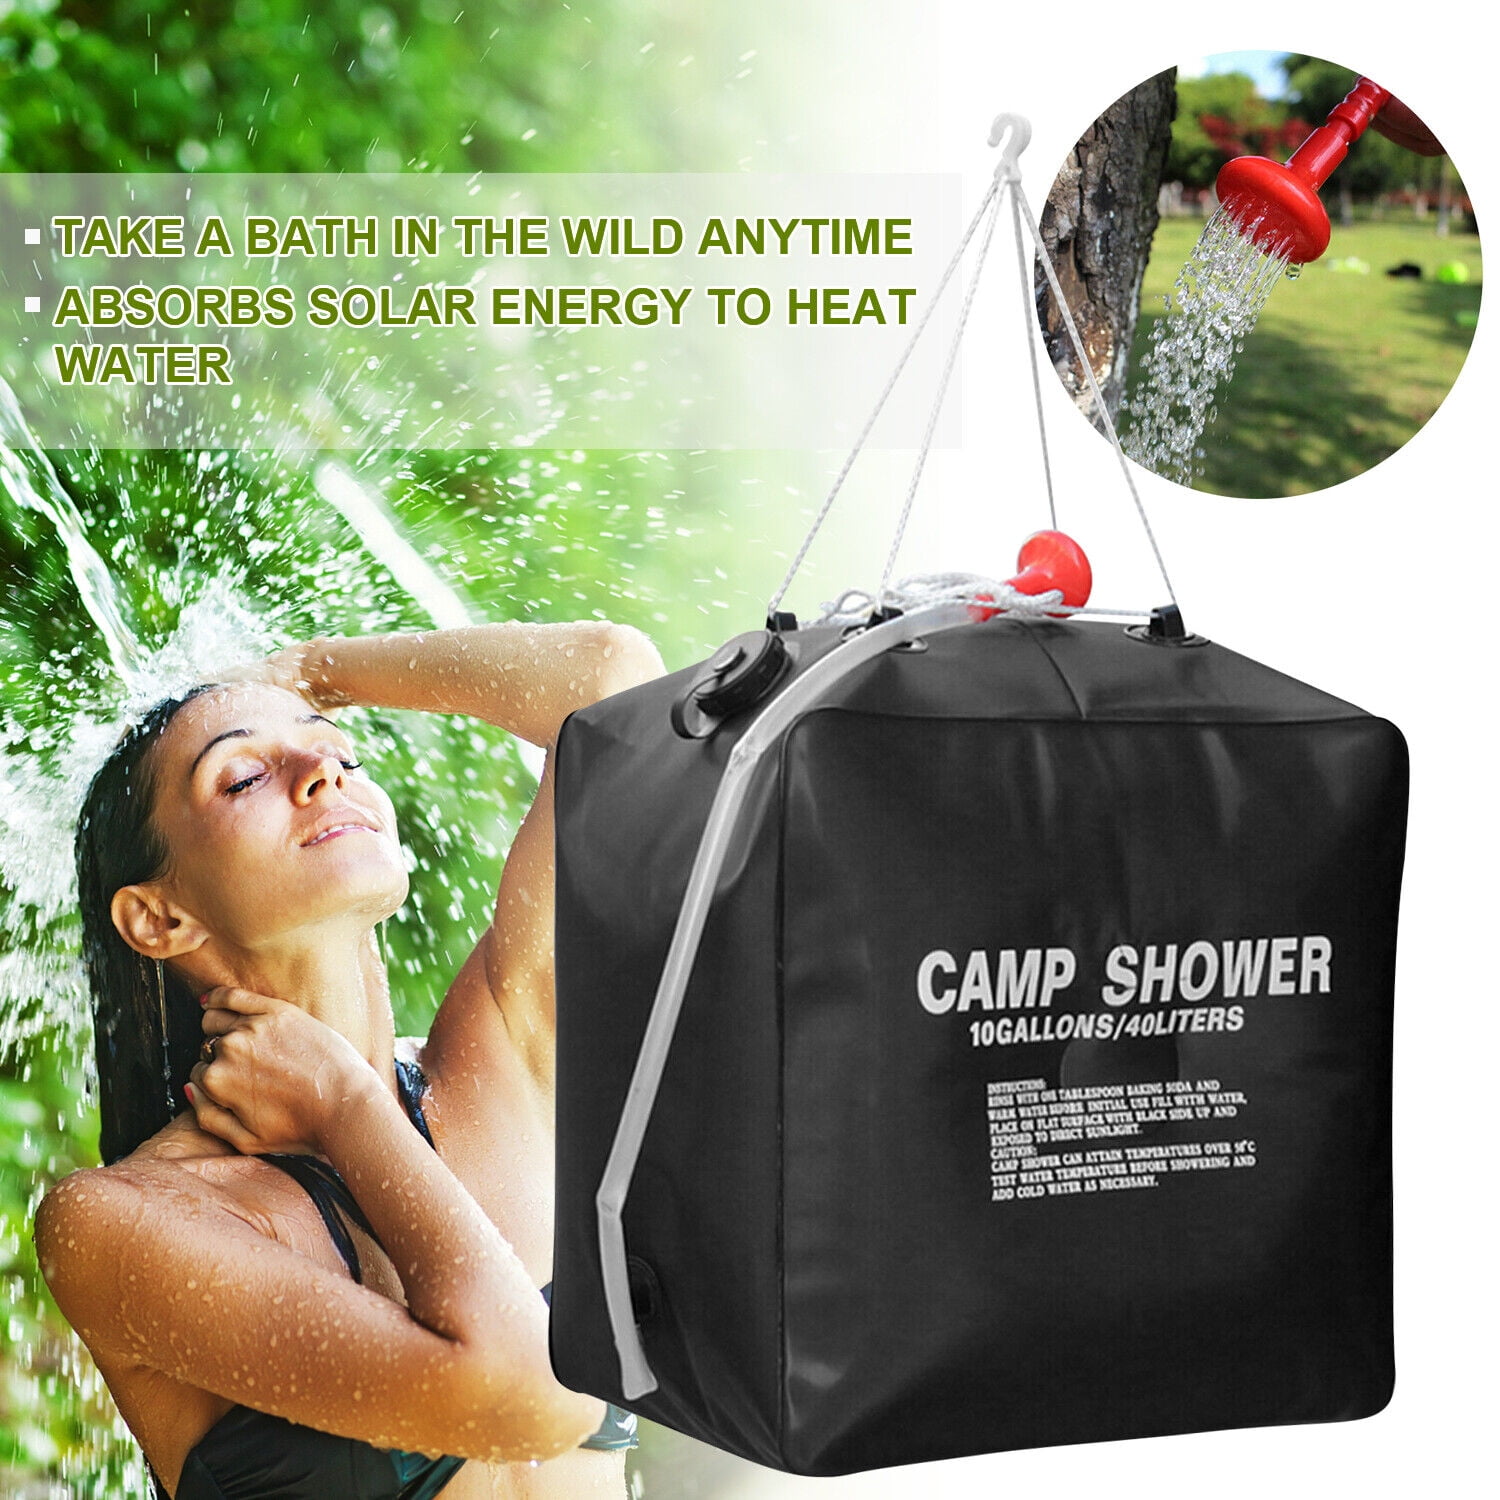 Camping Portable Solar Shower Bag, 10 Gallons/40L, with On/Off Shower Head, for Camping, Beach Swimming, Outdoor Traveling, Men's, Black